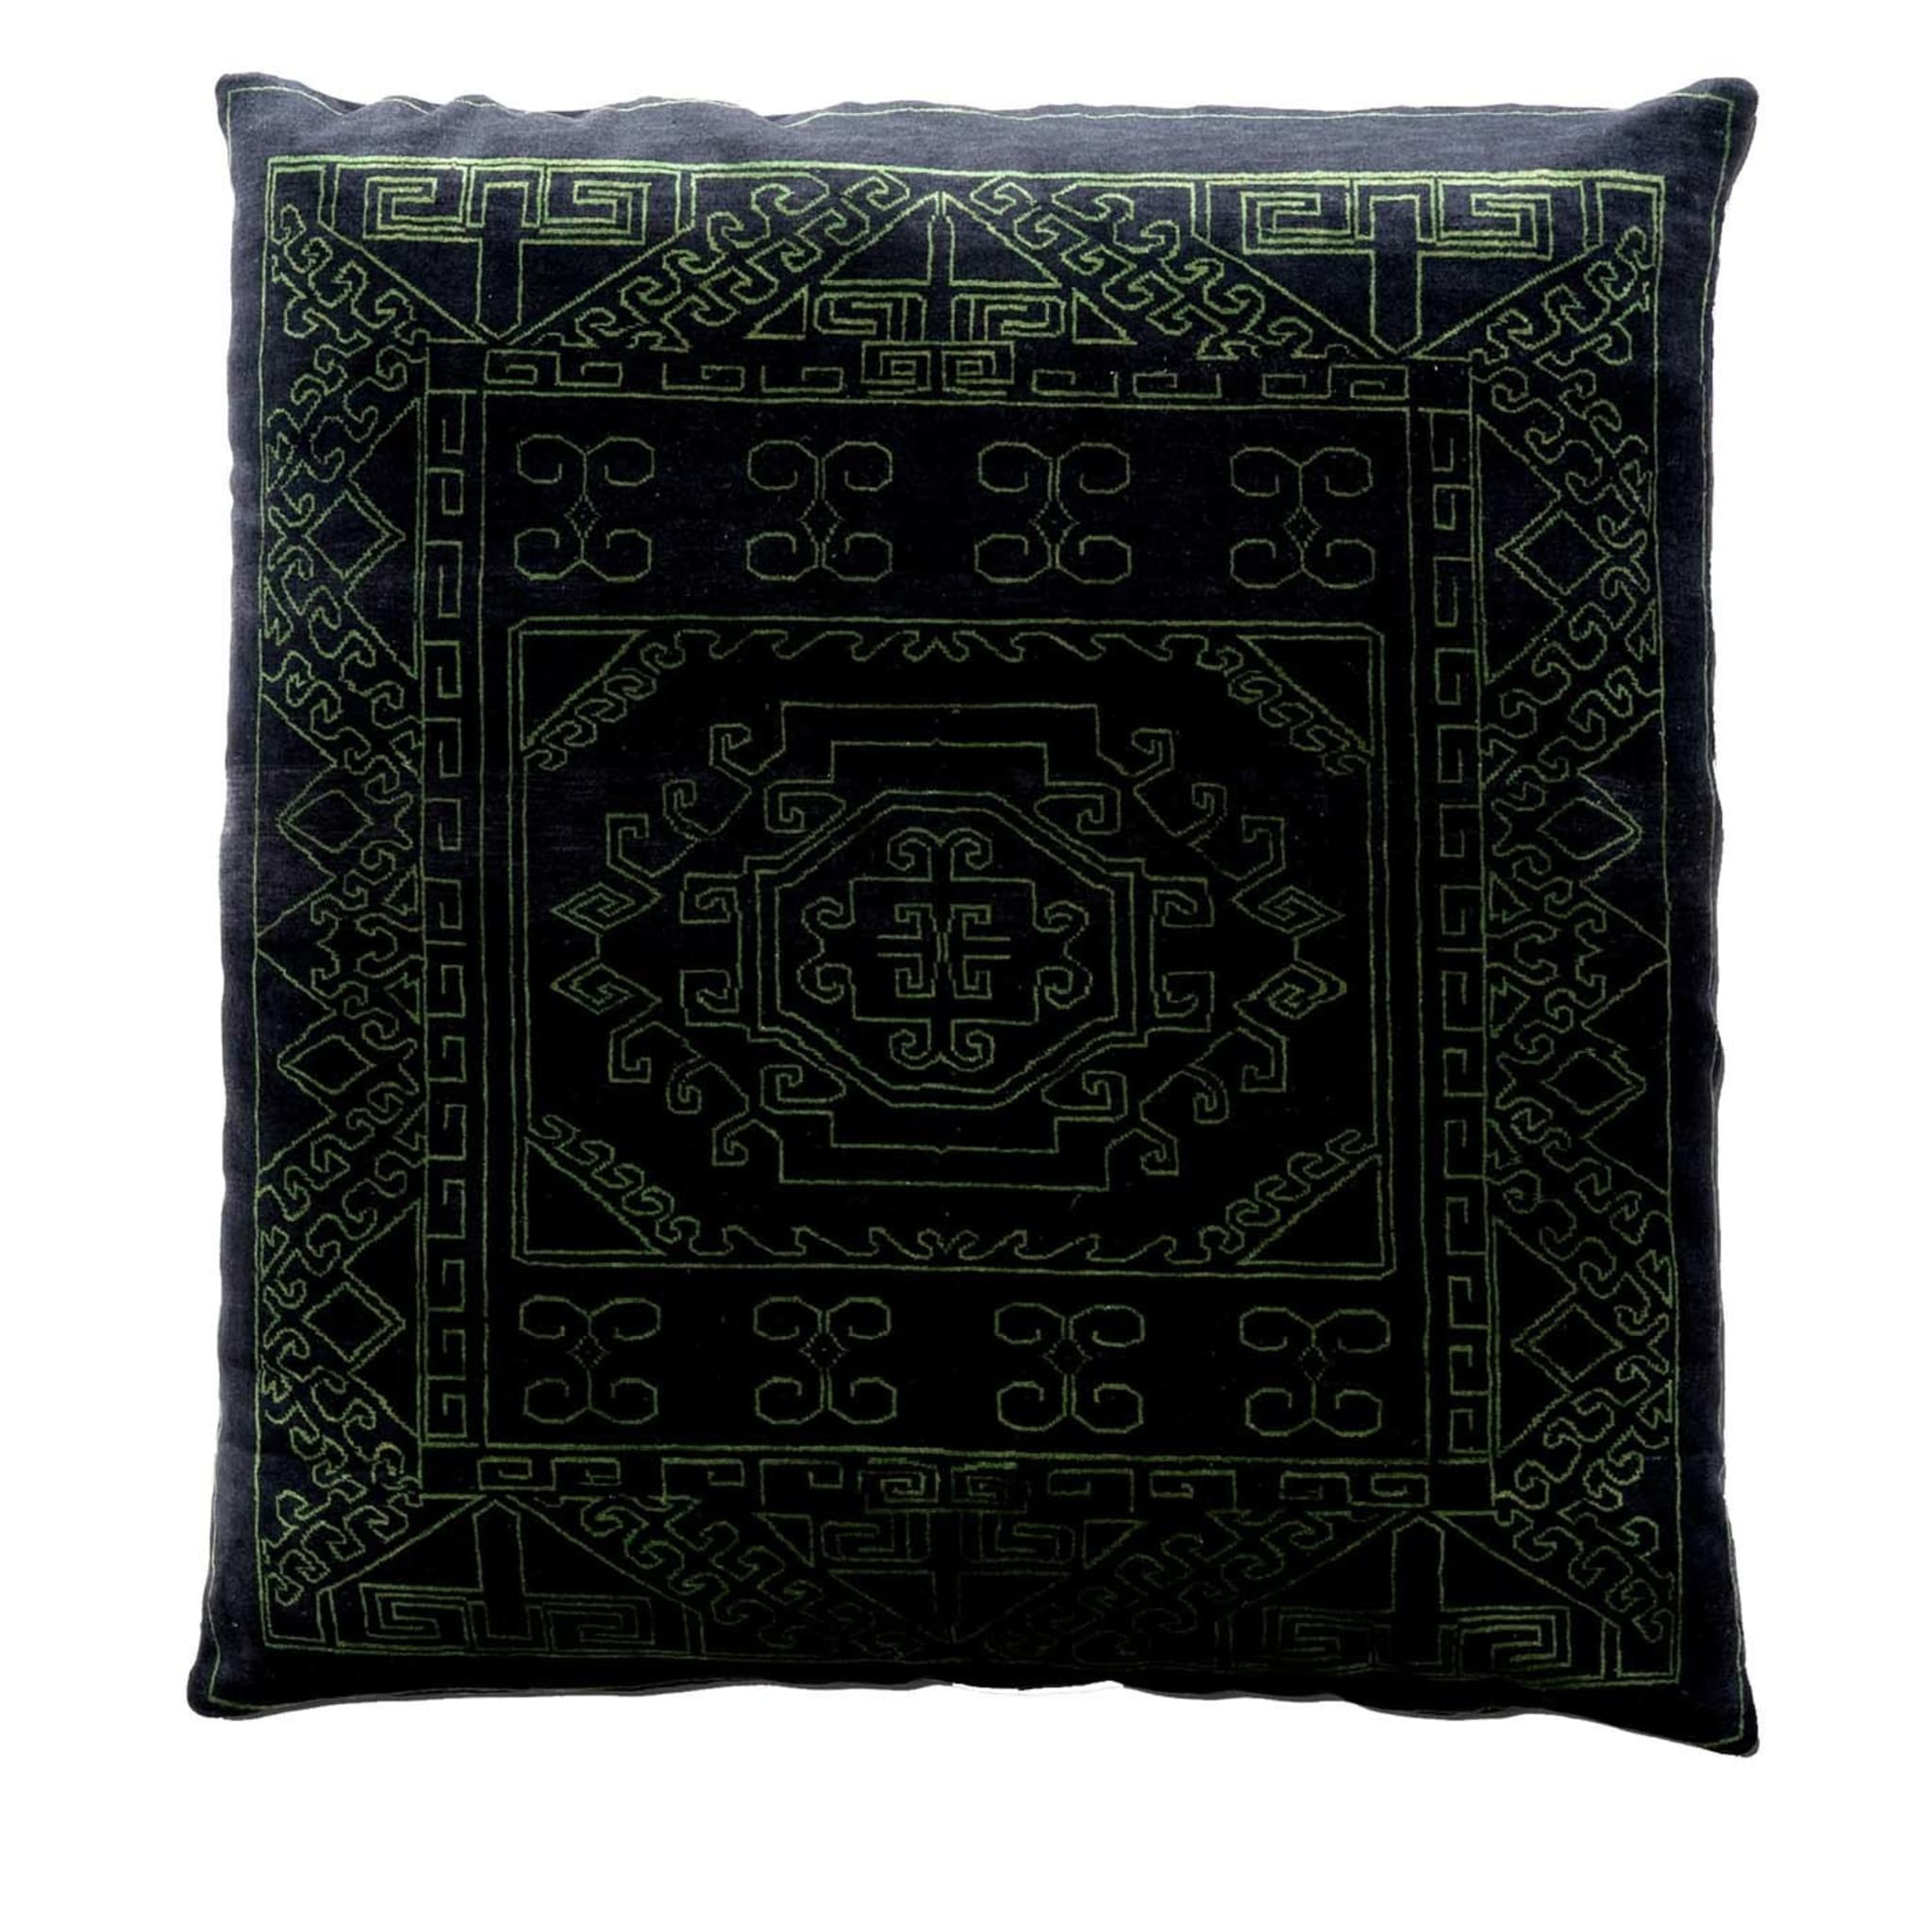 Mr. Nest Cushion Pakistan 3 by Paolo Cappello - Main view